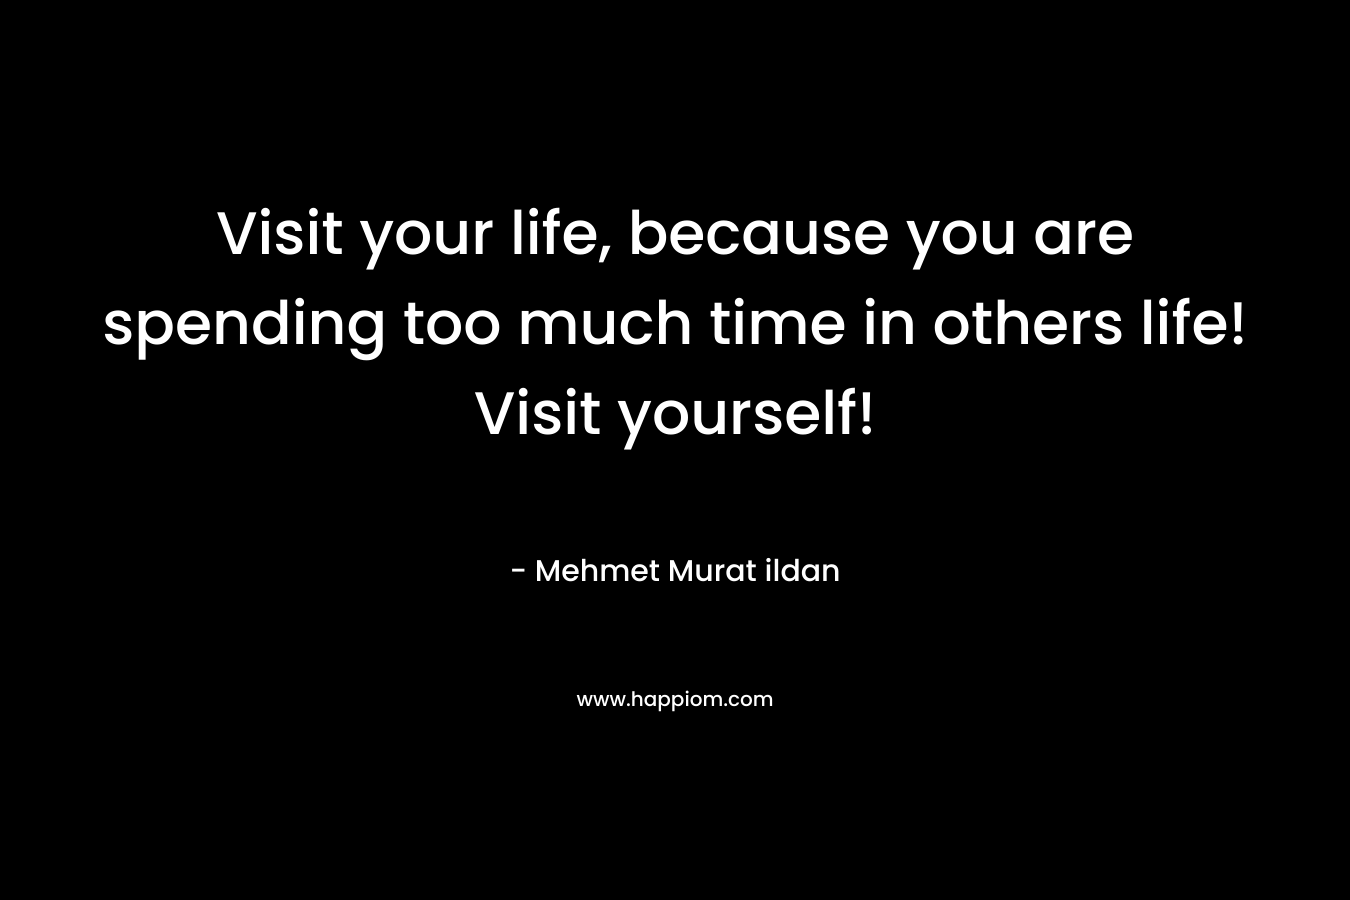 Visit your life, because you are spending too much time in others life! Visit yourself!